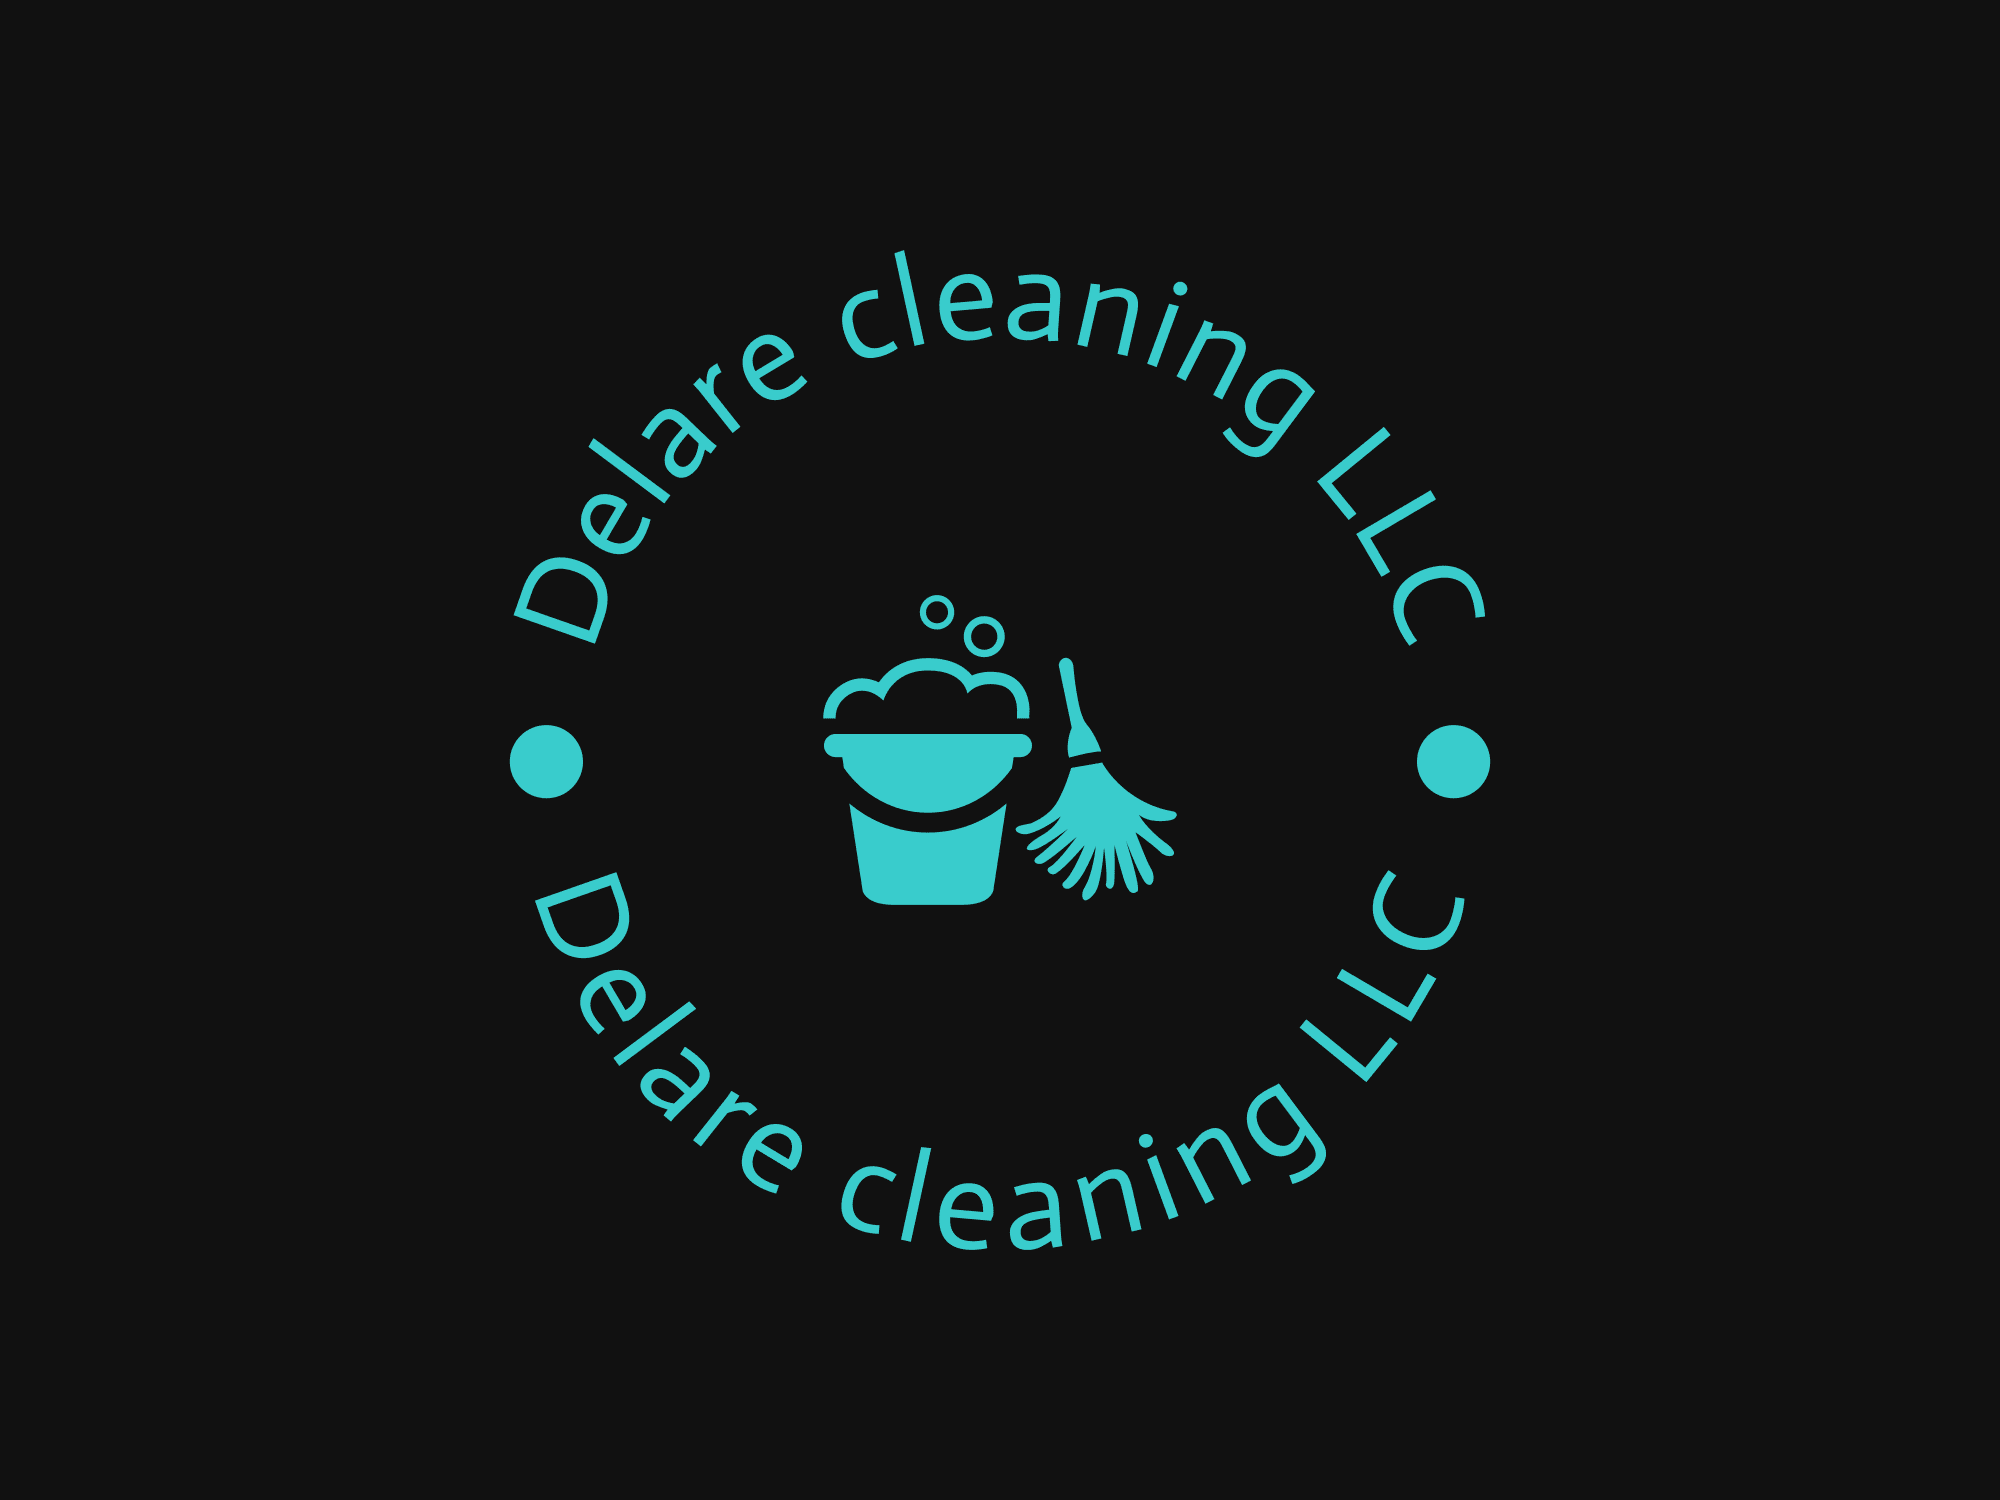 Delare Cleaning LLC Milwaukee (414)539-9054